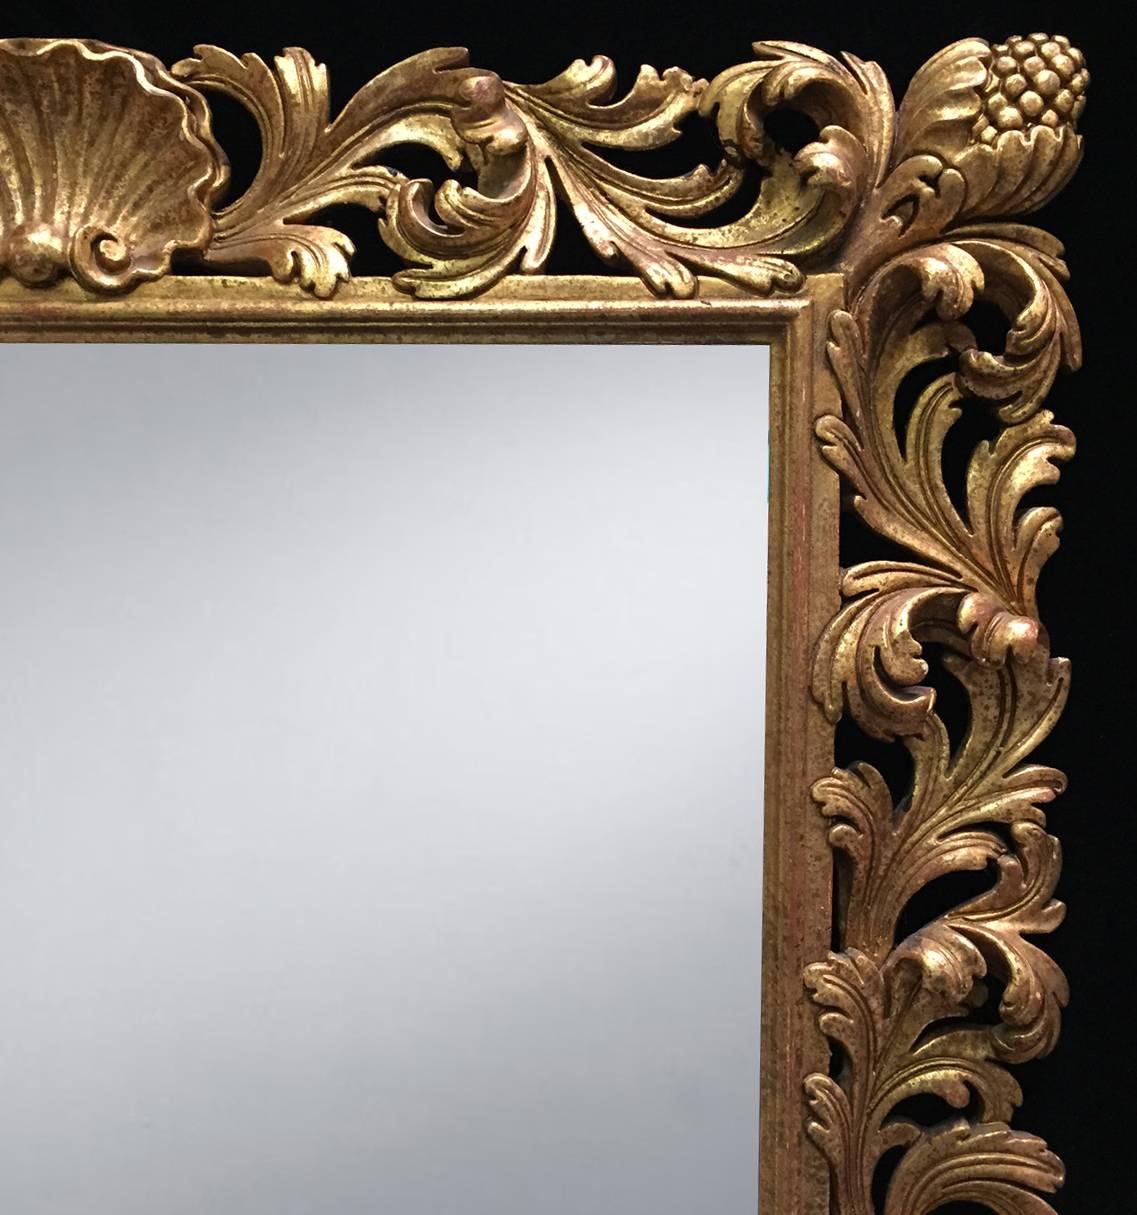 Attractive Roman Baroque style finely carved giltwood rectangular mirror with shell and acanthus leaf motif, circa 1900.

